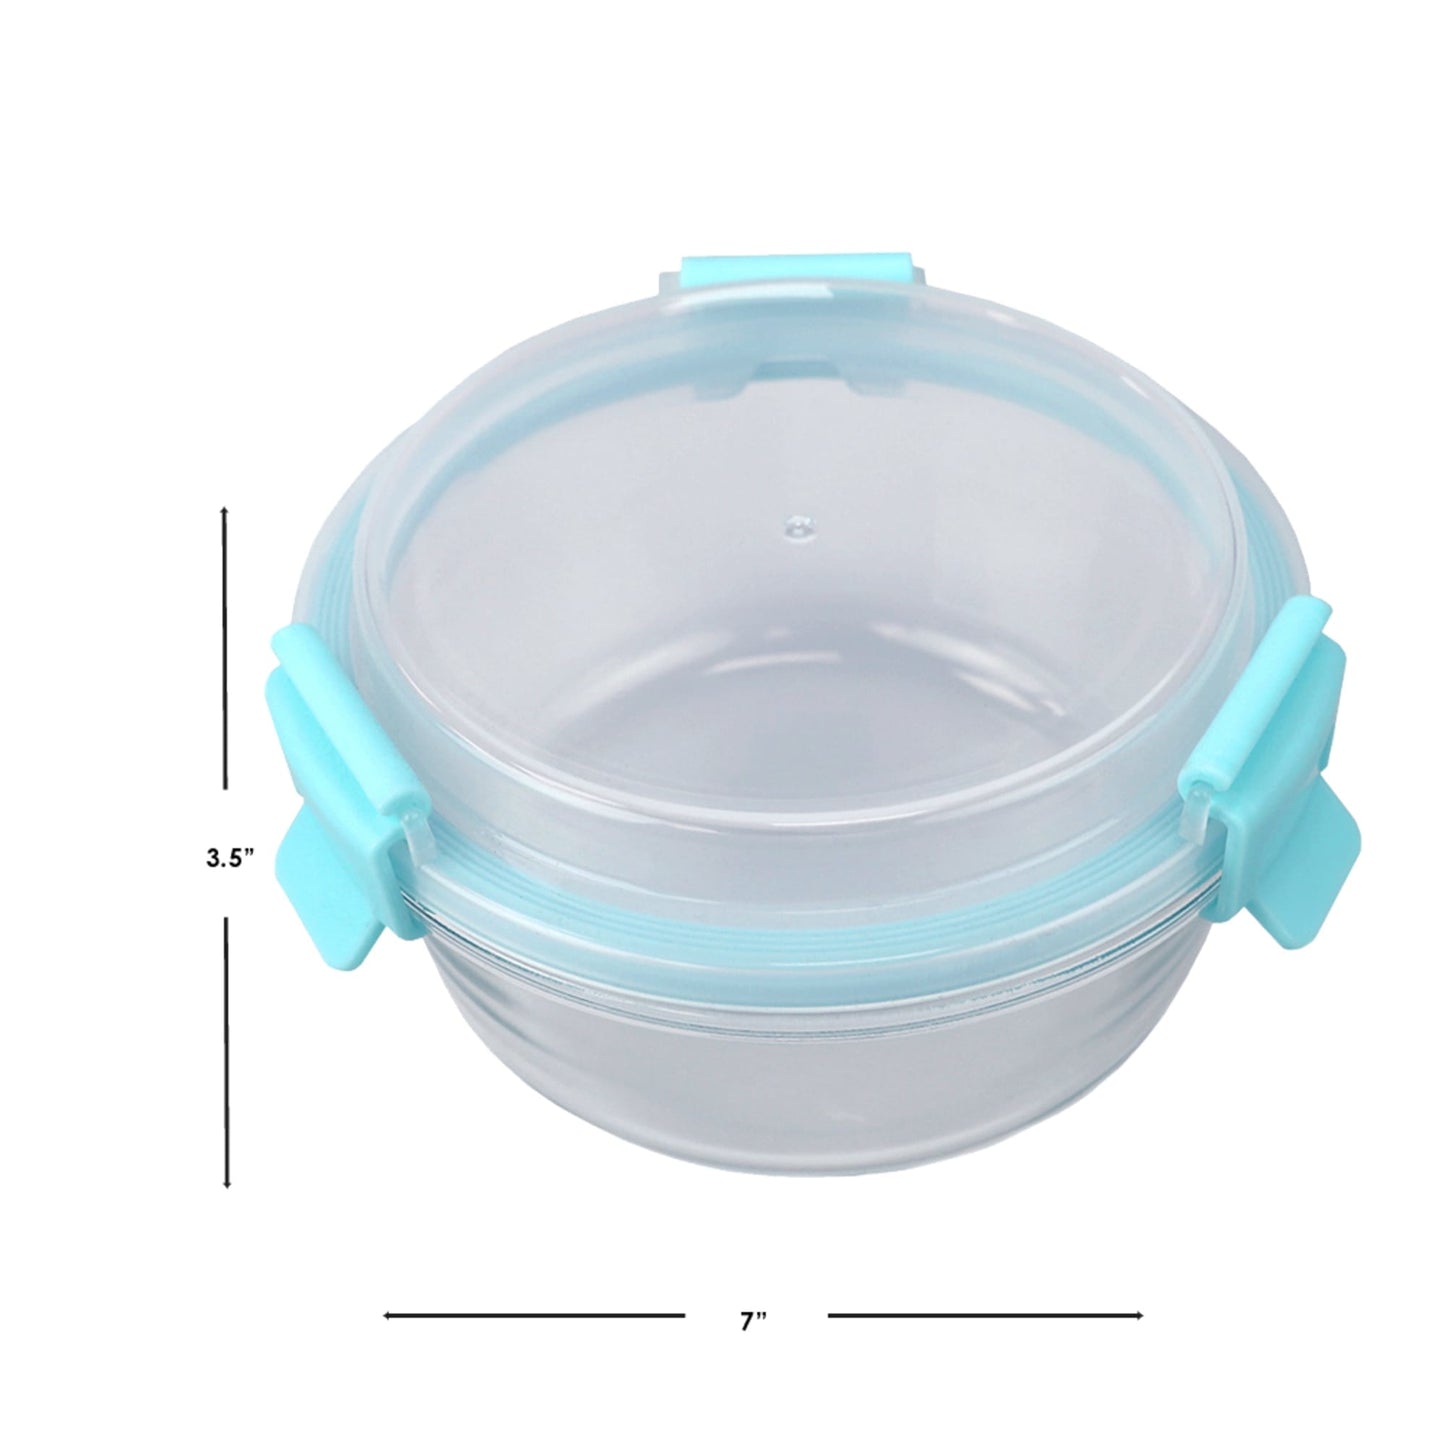 Leak Proof 32 oz. Round Borosilicate Glass Food Storage Container with Air-tight Plastic Lid, Turquoise